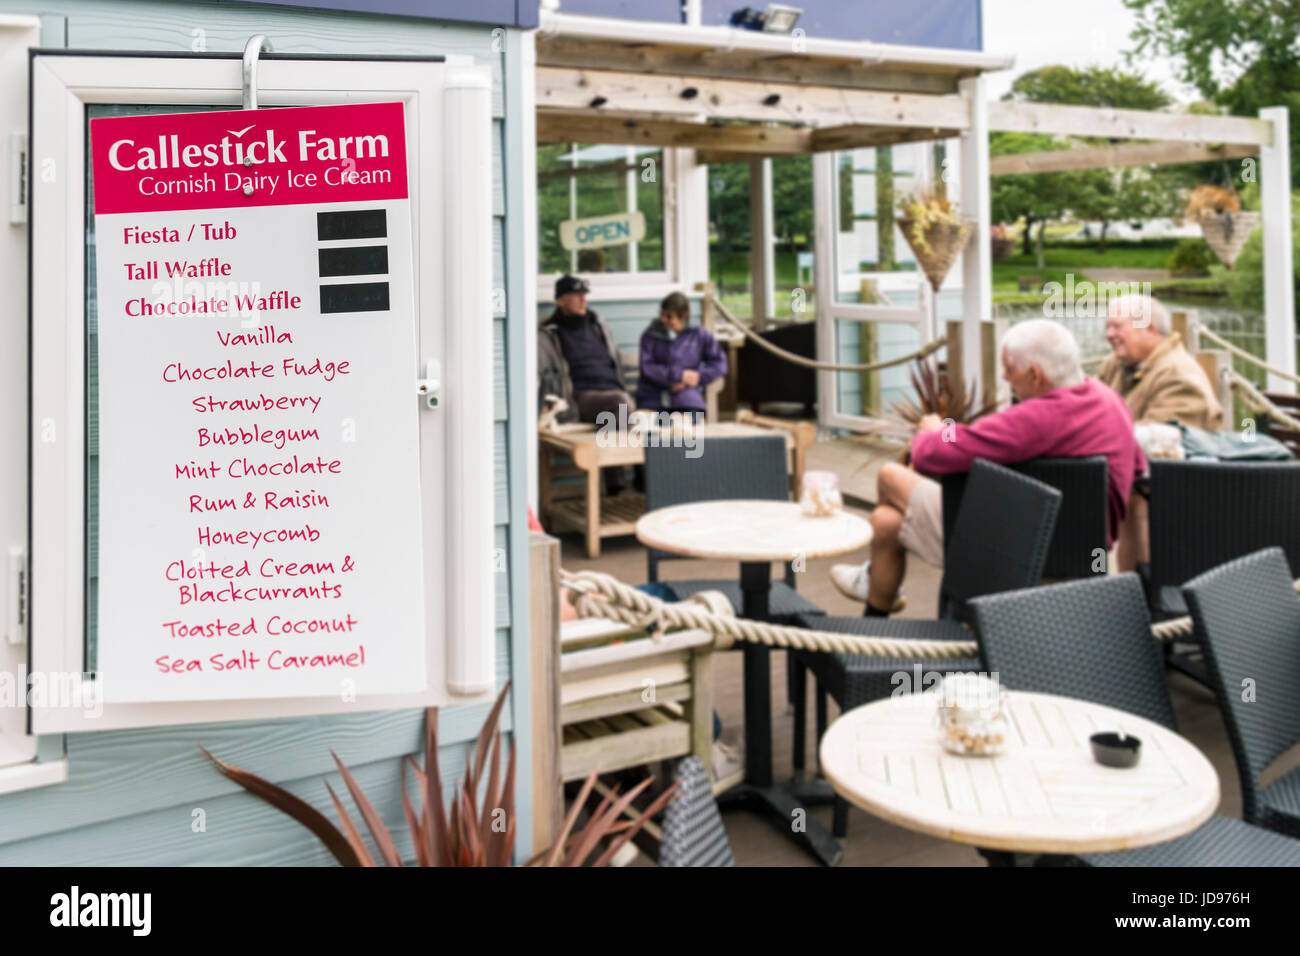 A sign listing various flavours of Cornish Dairy Ice Cream hanging on the wall of a cafe. Stock Photo